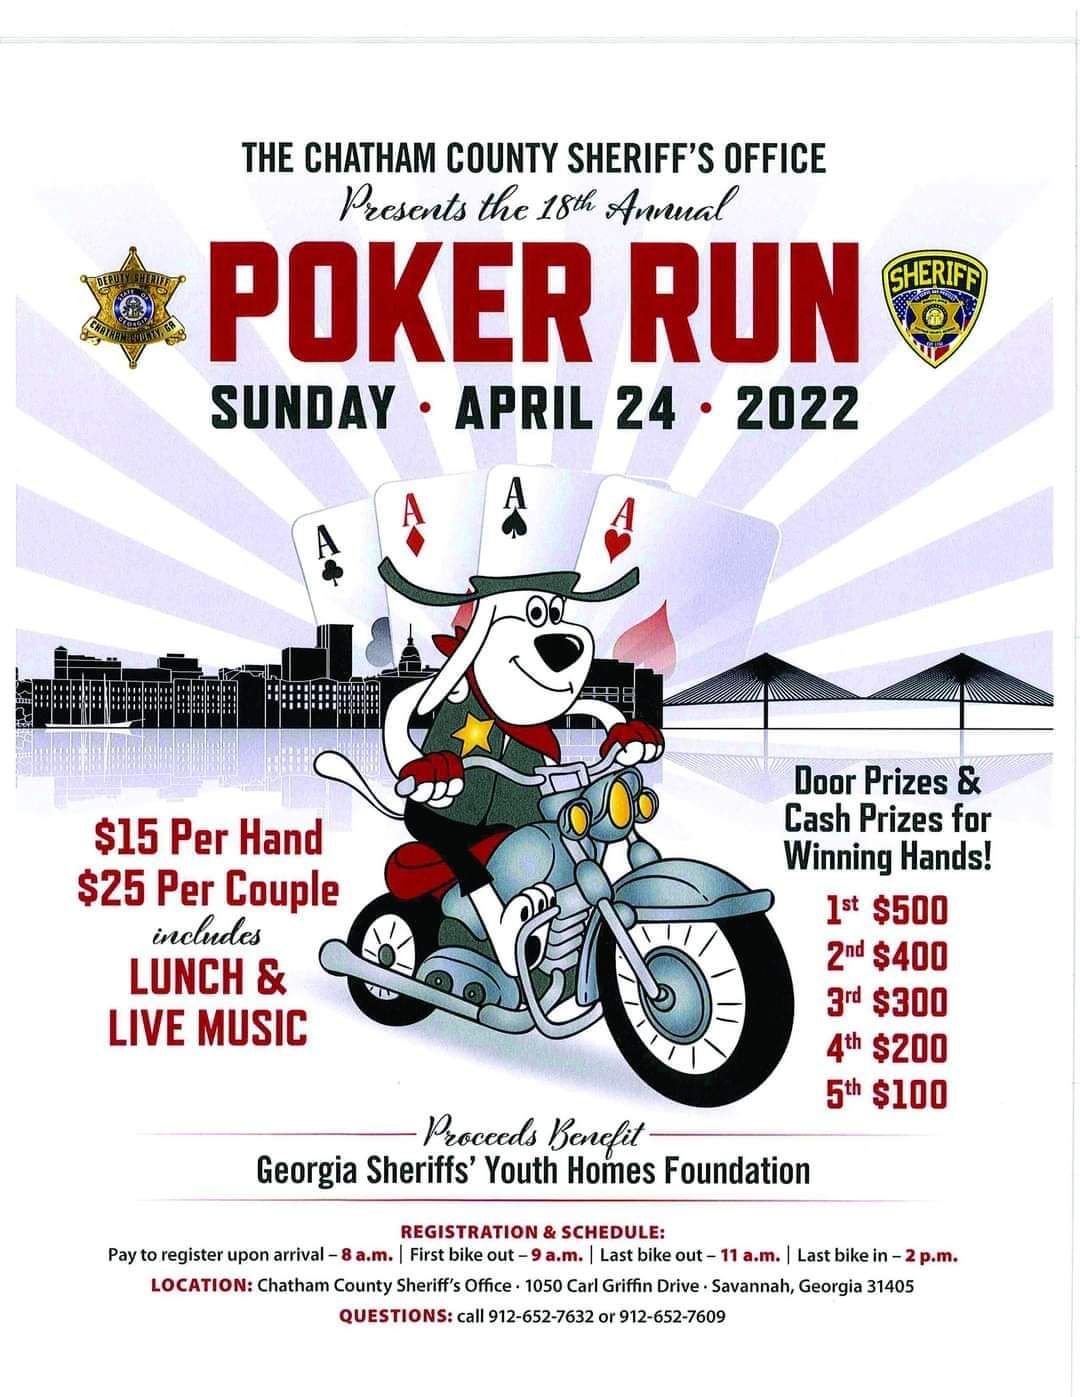 Chatham Co. Sheriff's Office - 18th Annual Poker Run @ Chatham County Sheriff's Office | Savannah | Georgia | United States